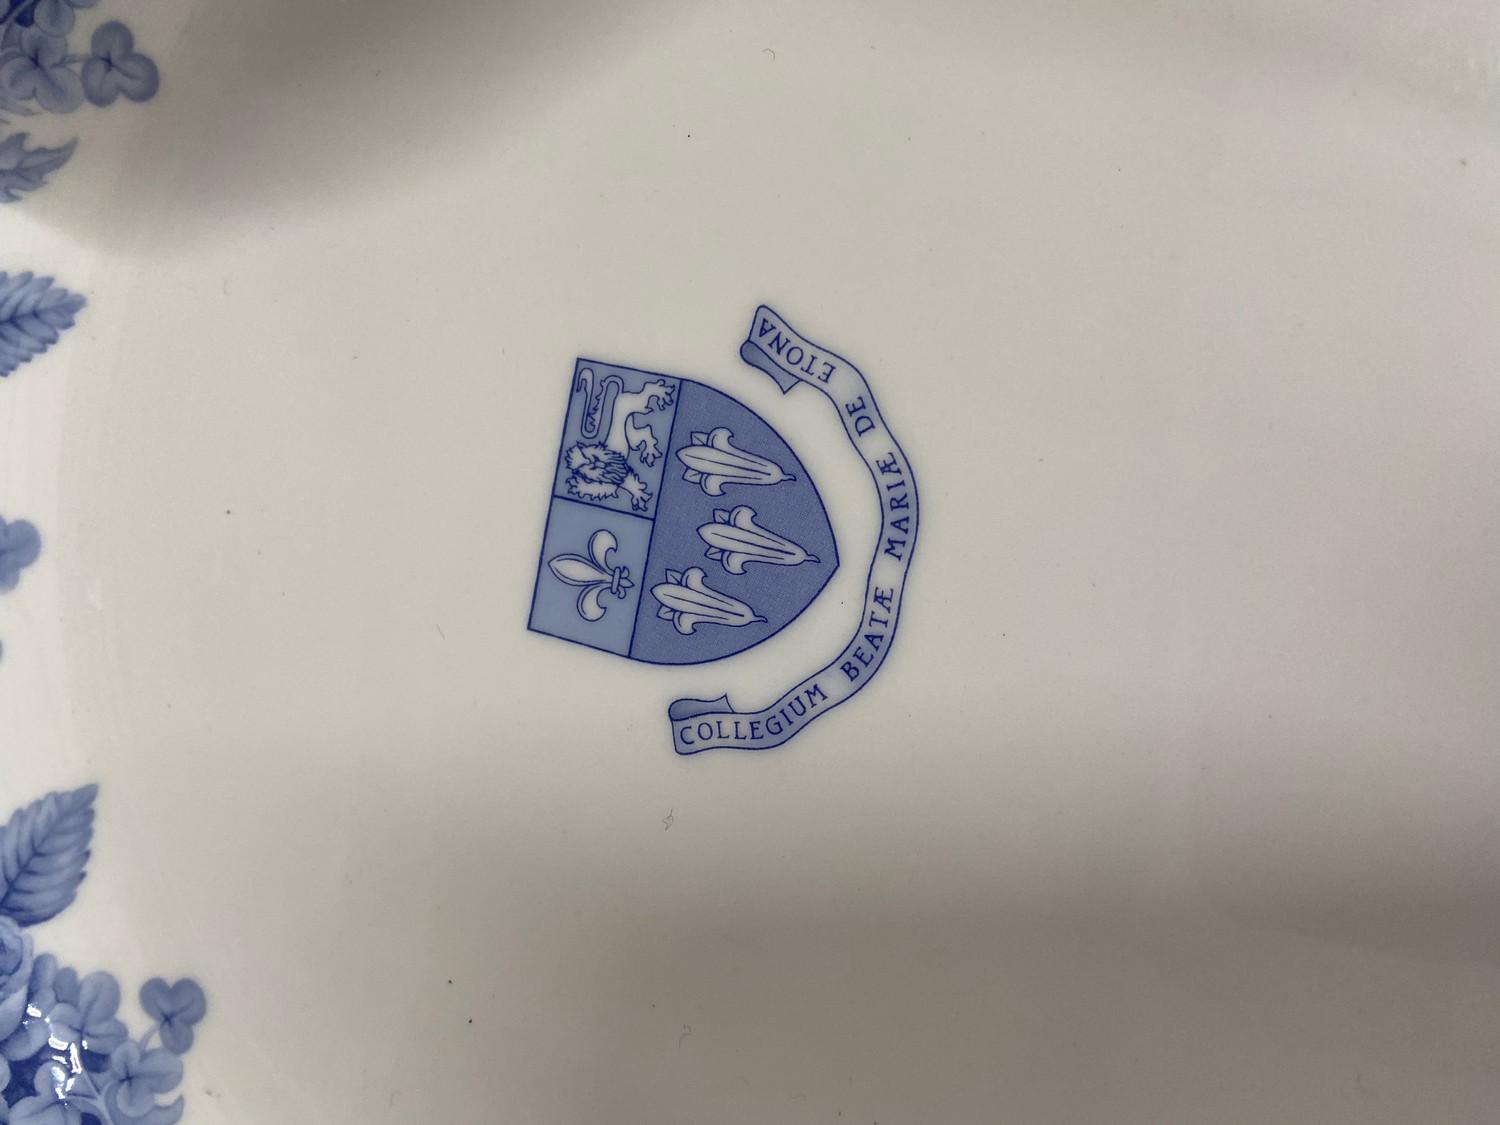 Seven 1989 Royal Doulton Eton College blue and white dinner plates. - Image 2 of 3